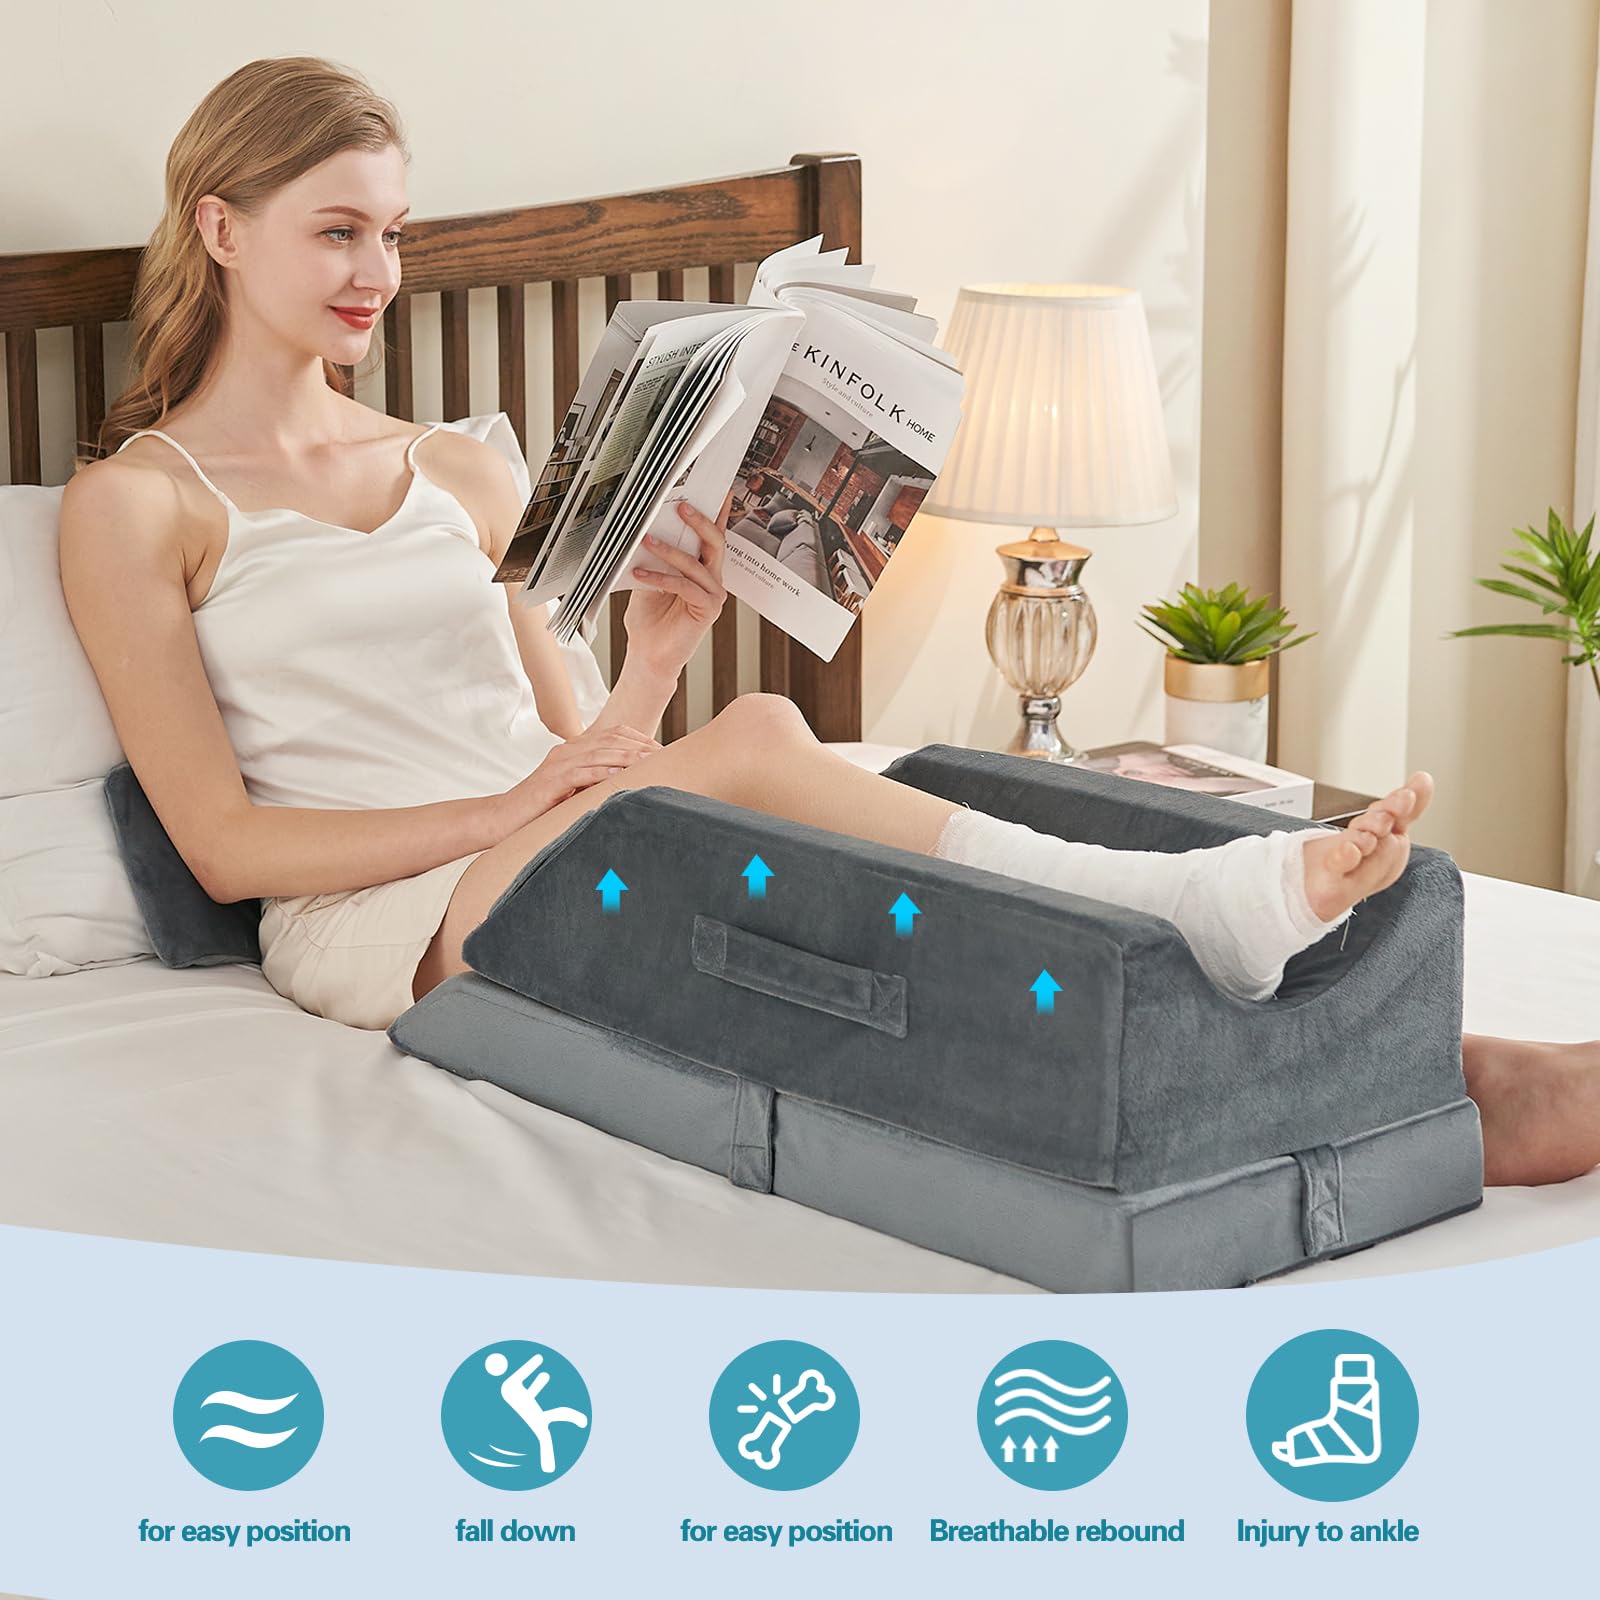 JOYWOO Memory Foam Leg Elevation Pillow - Post-Surgery, Knee and Ankle Injuries, Swelling - 3 Height Adjustments - Removable/Washable